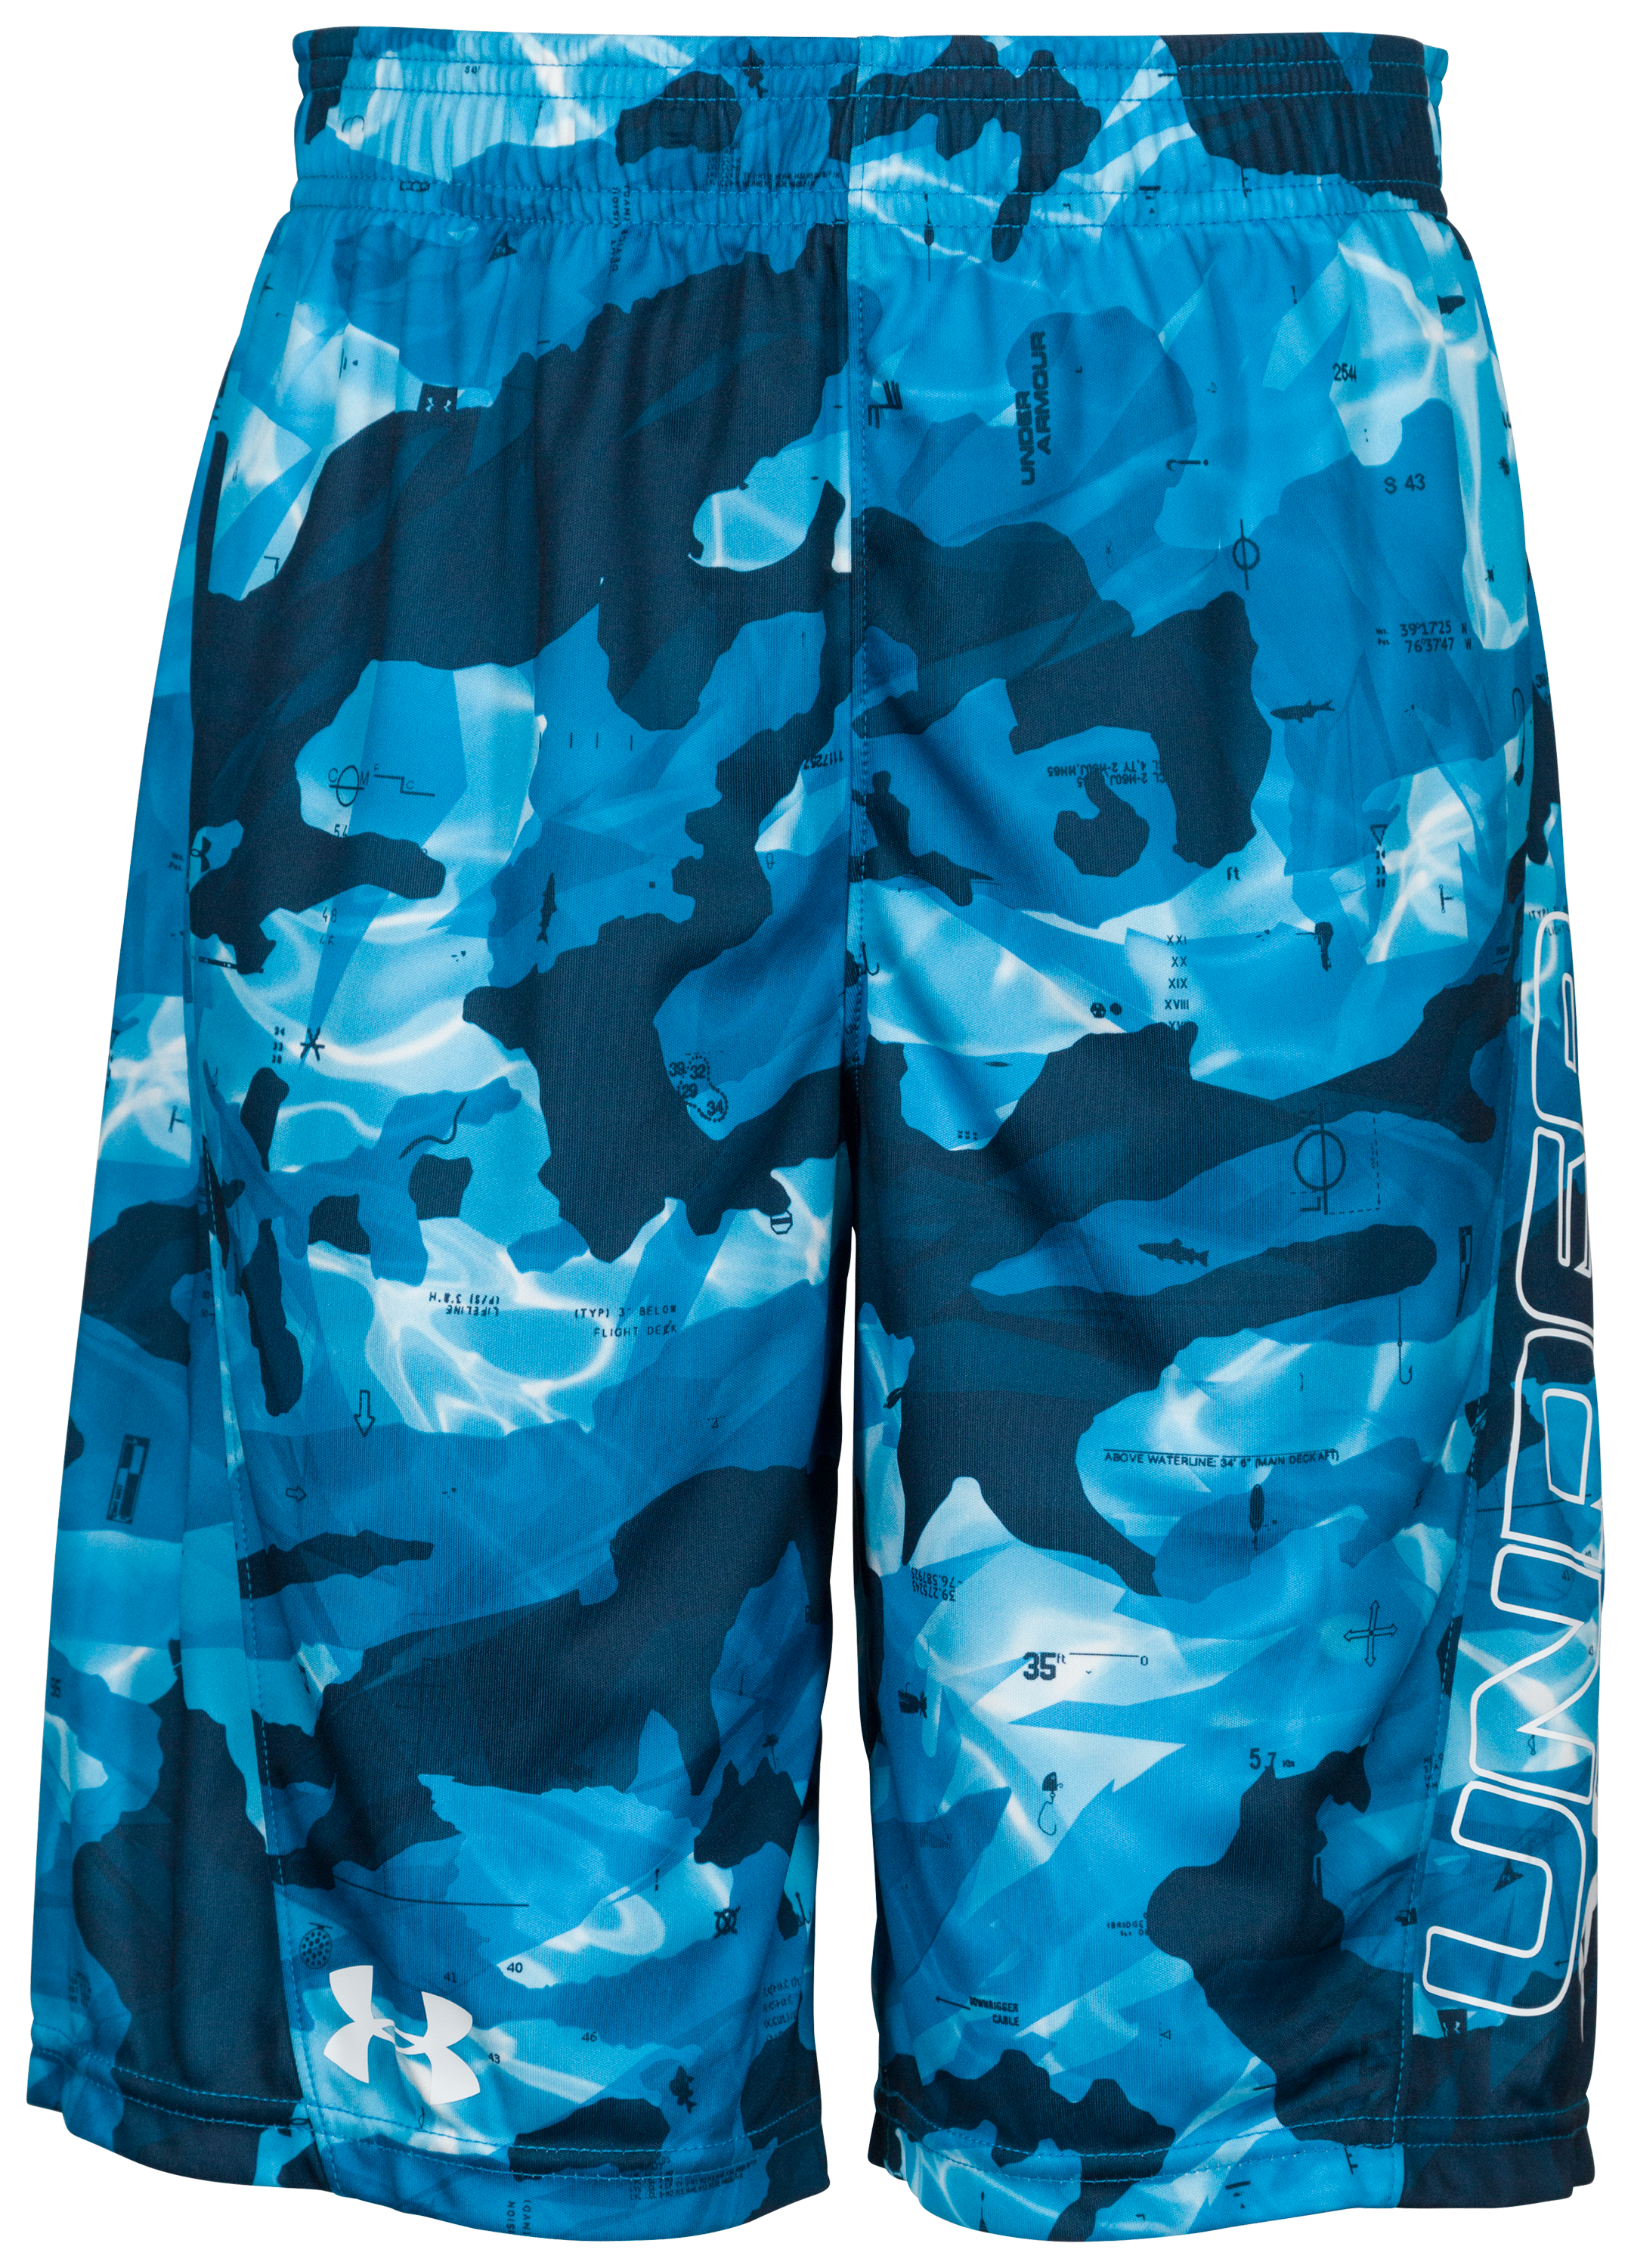 Under Armour Basin Camo Boost Shorts for Toddlers or Kids | Bass Pro Shops